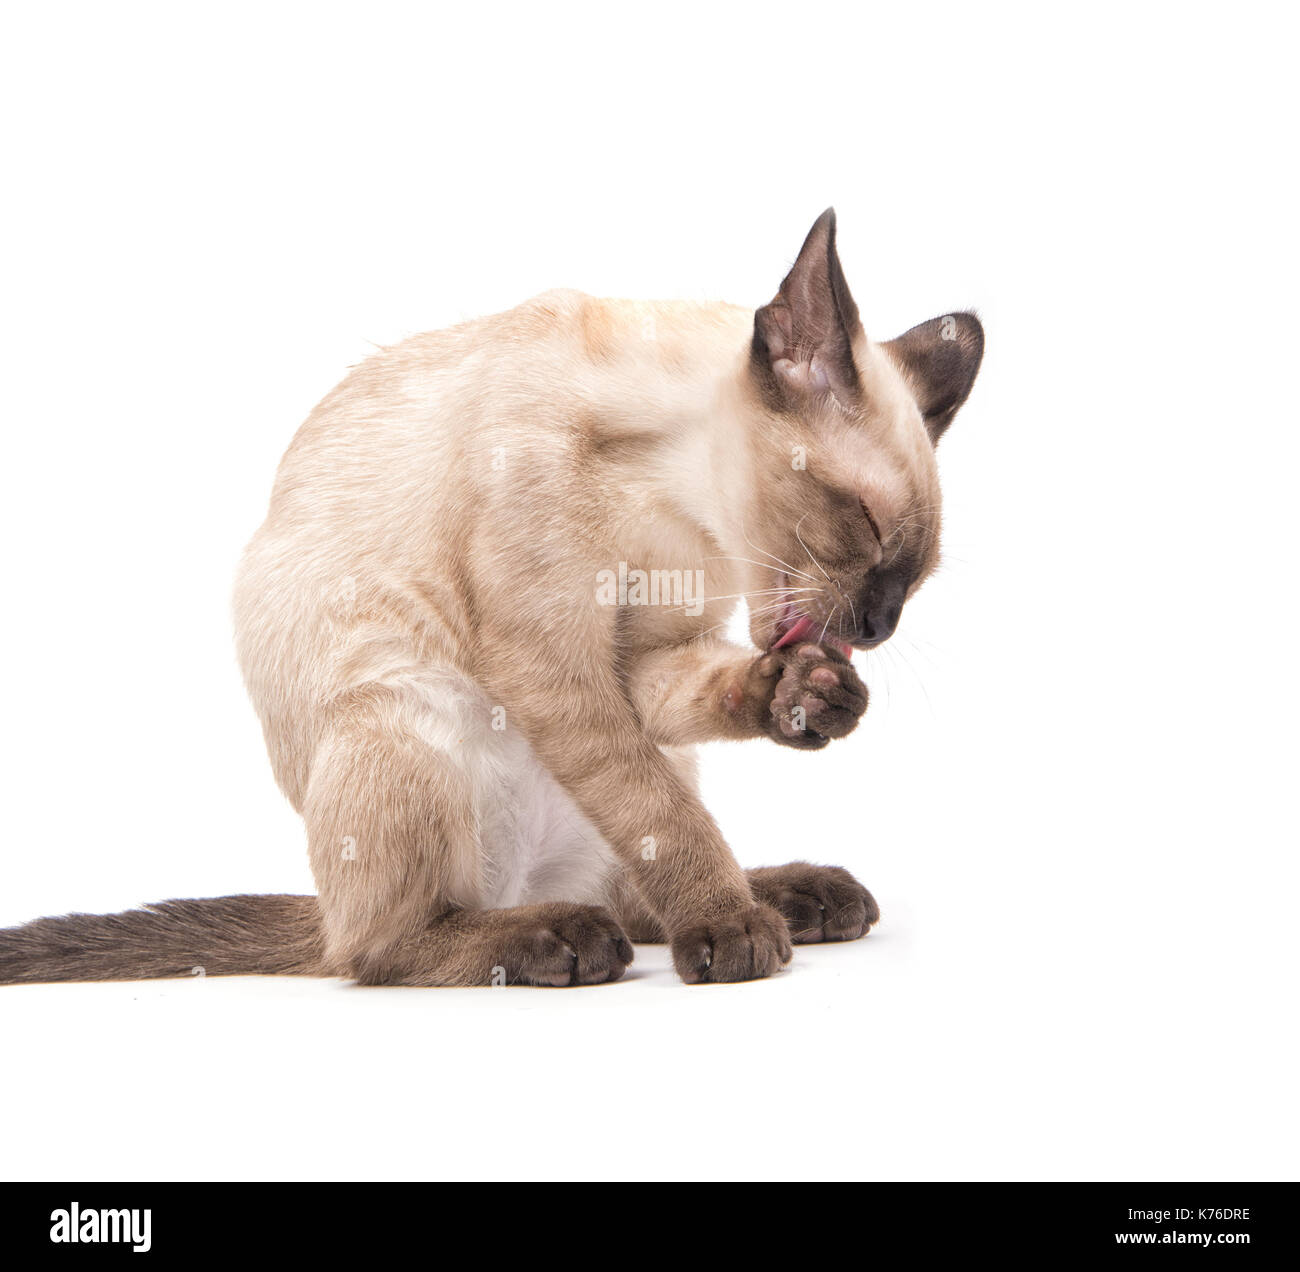 Side view of a young Siamese cat licking his paw, on white background Stock Photo